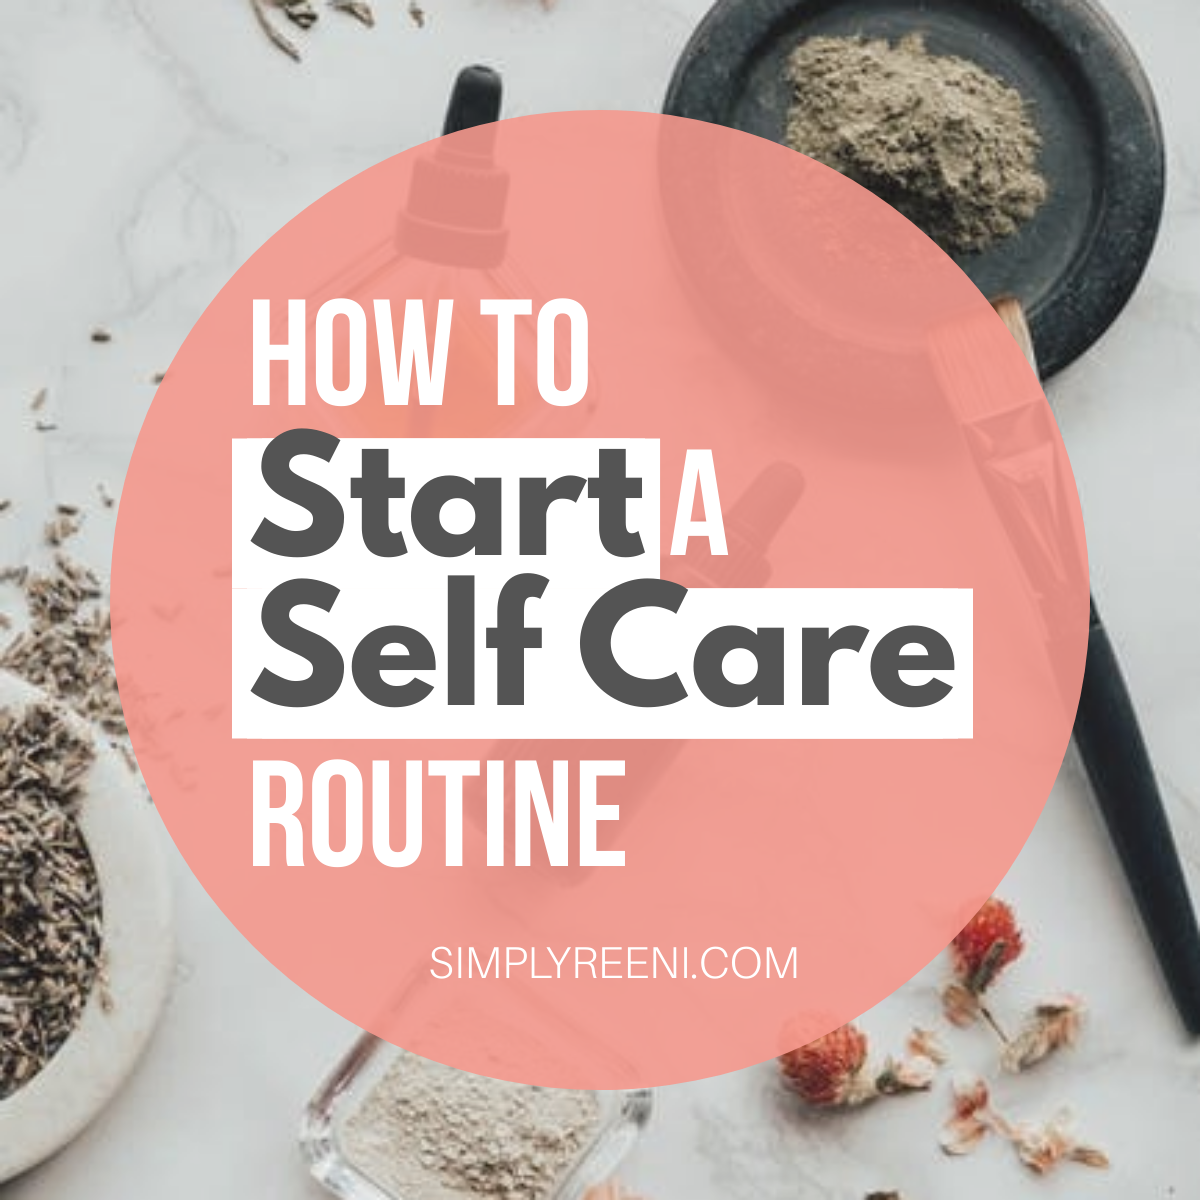 How to Start a Self Care Routine